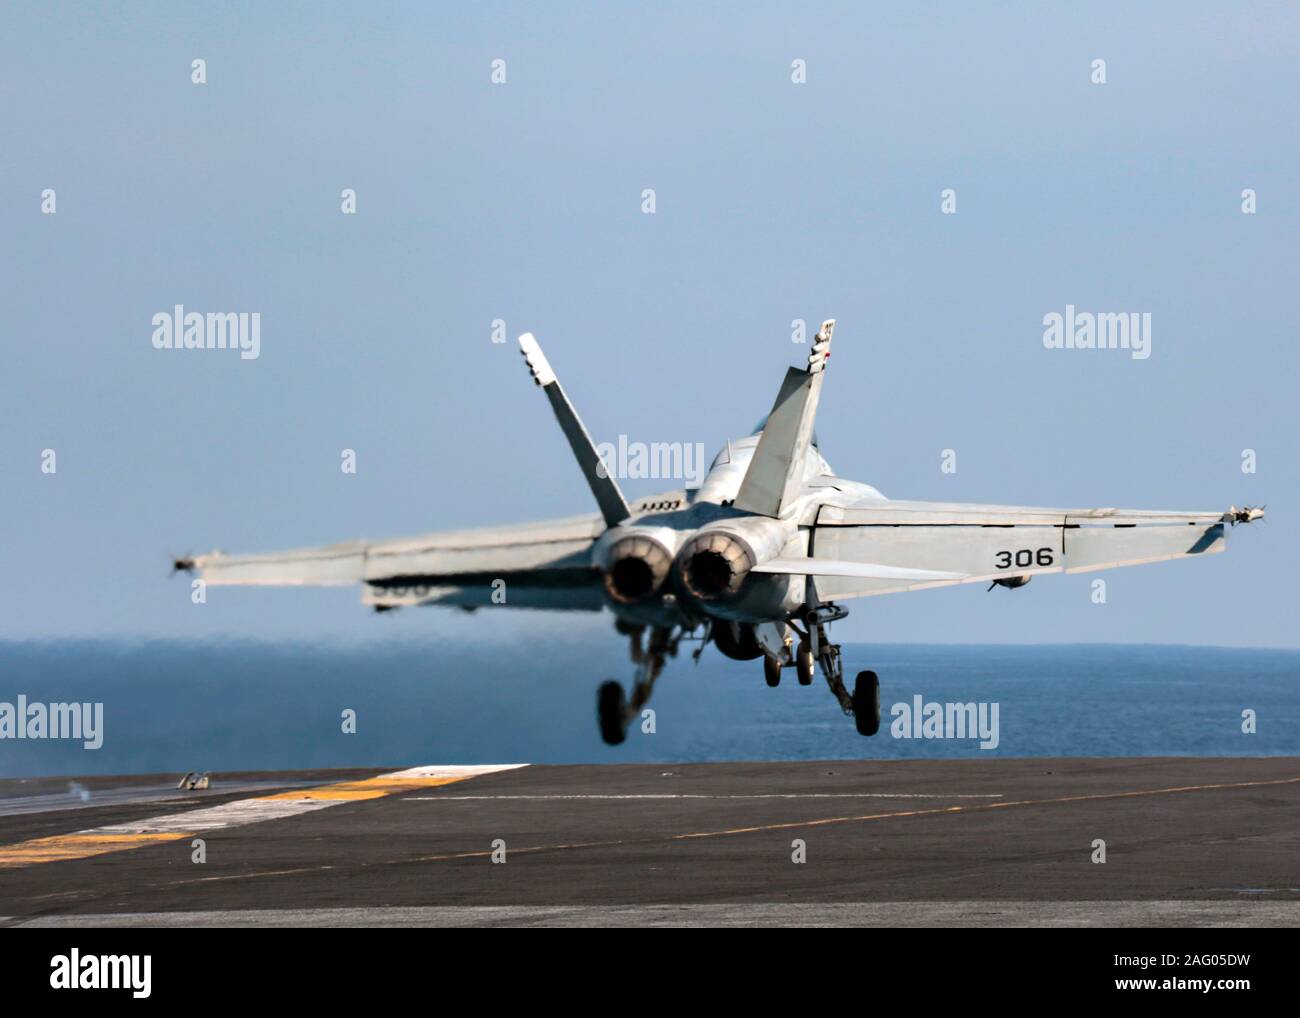 A U.S. Navy F/A-18E Super Hornet fighter aircraft attached to the Sidewinders of Strike Fighter Squadron 86, launches from the flight deck of the Nimitz-class aircraft carrier USS Abraham Lincoln in support of Operation Inherent Resolve December 13, 2019 in the Arabian Gulf. Stock Photo